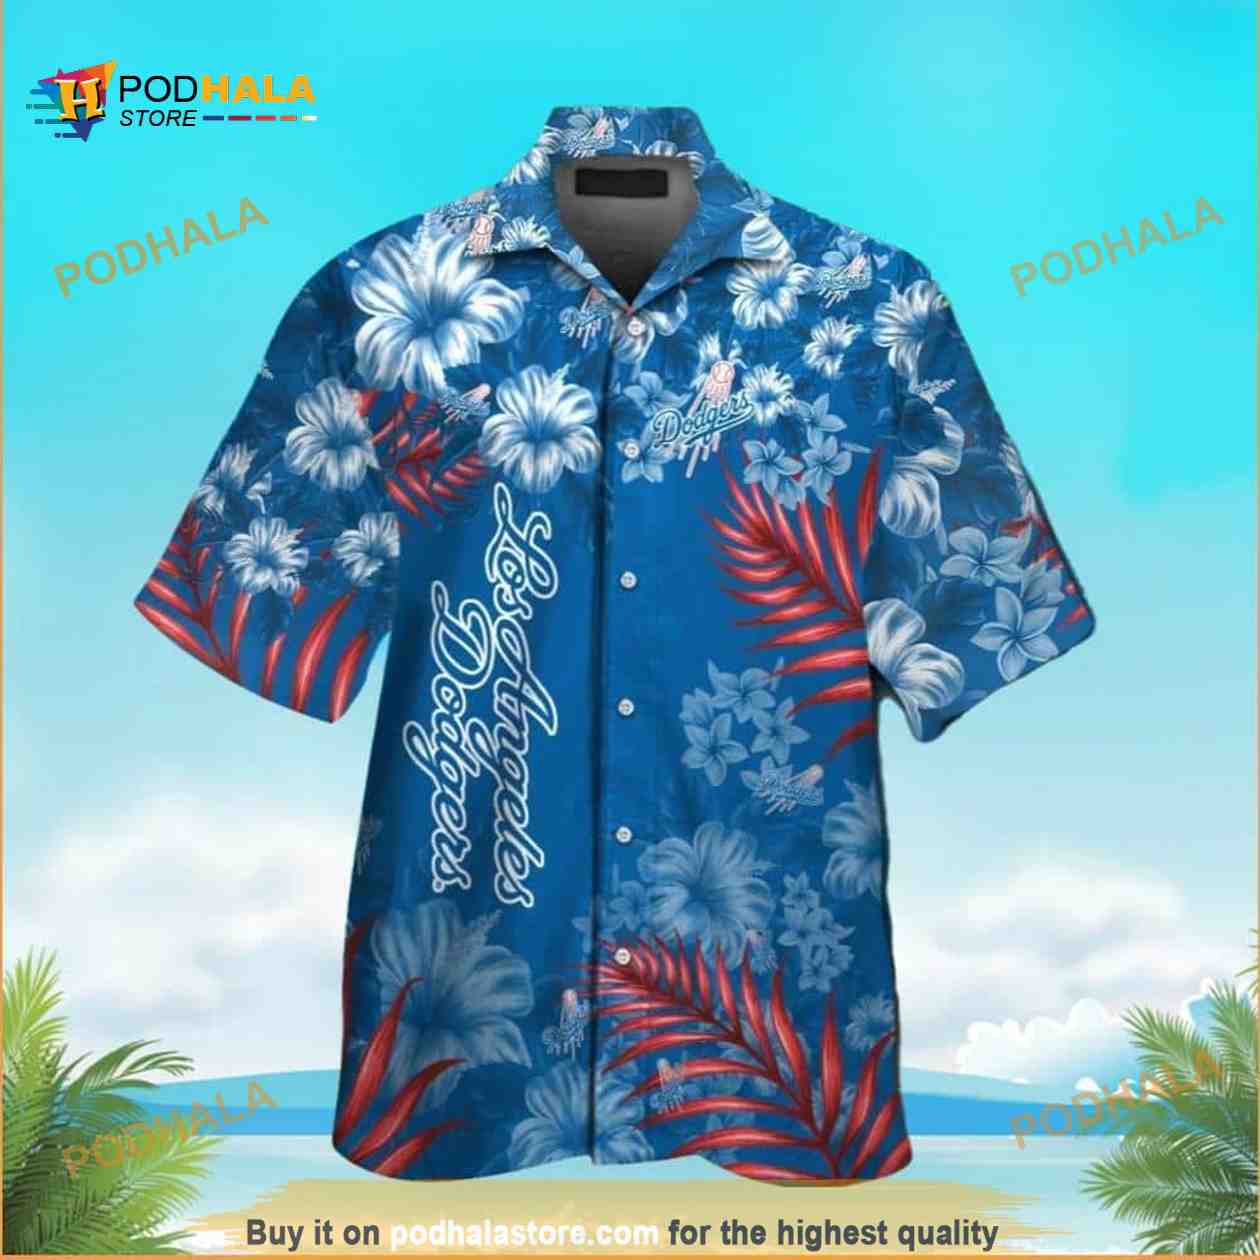 Dodgers Hawaiian Shirt Palm Leaf Pattern Los Angeles Dodgers Gift -  Personalized Gifts: Family, Sports, Occasions, Trending